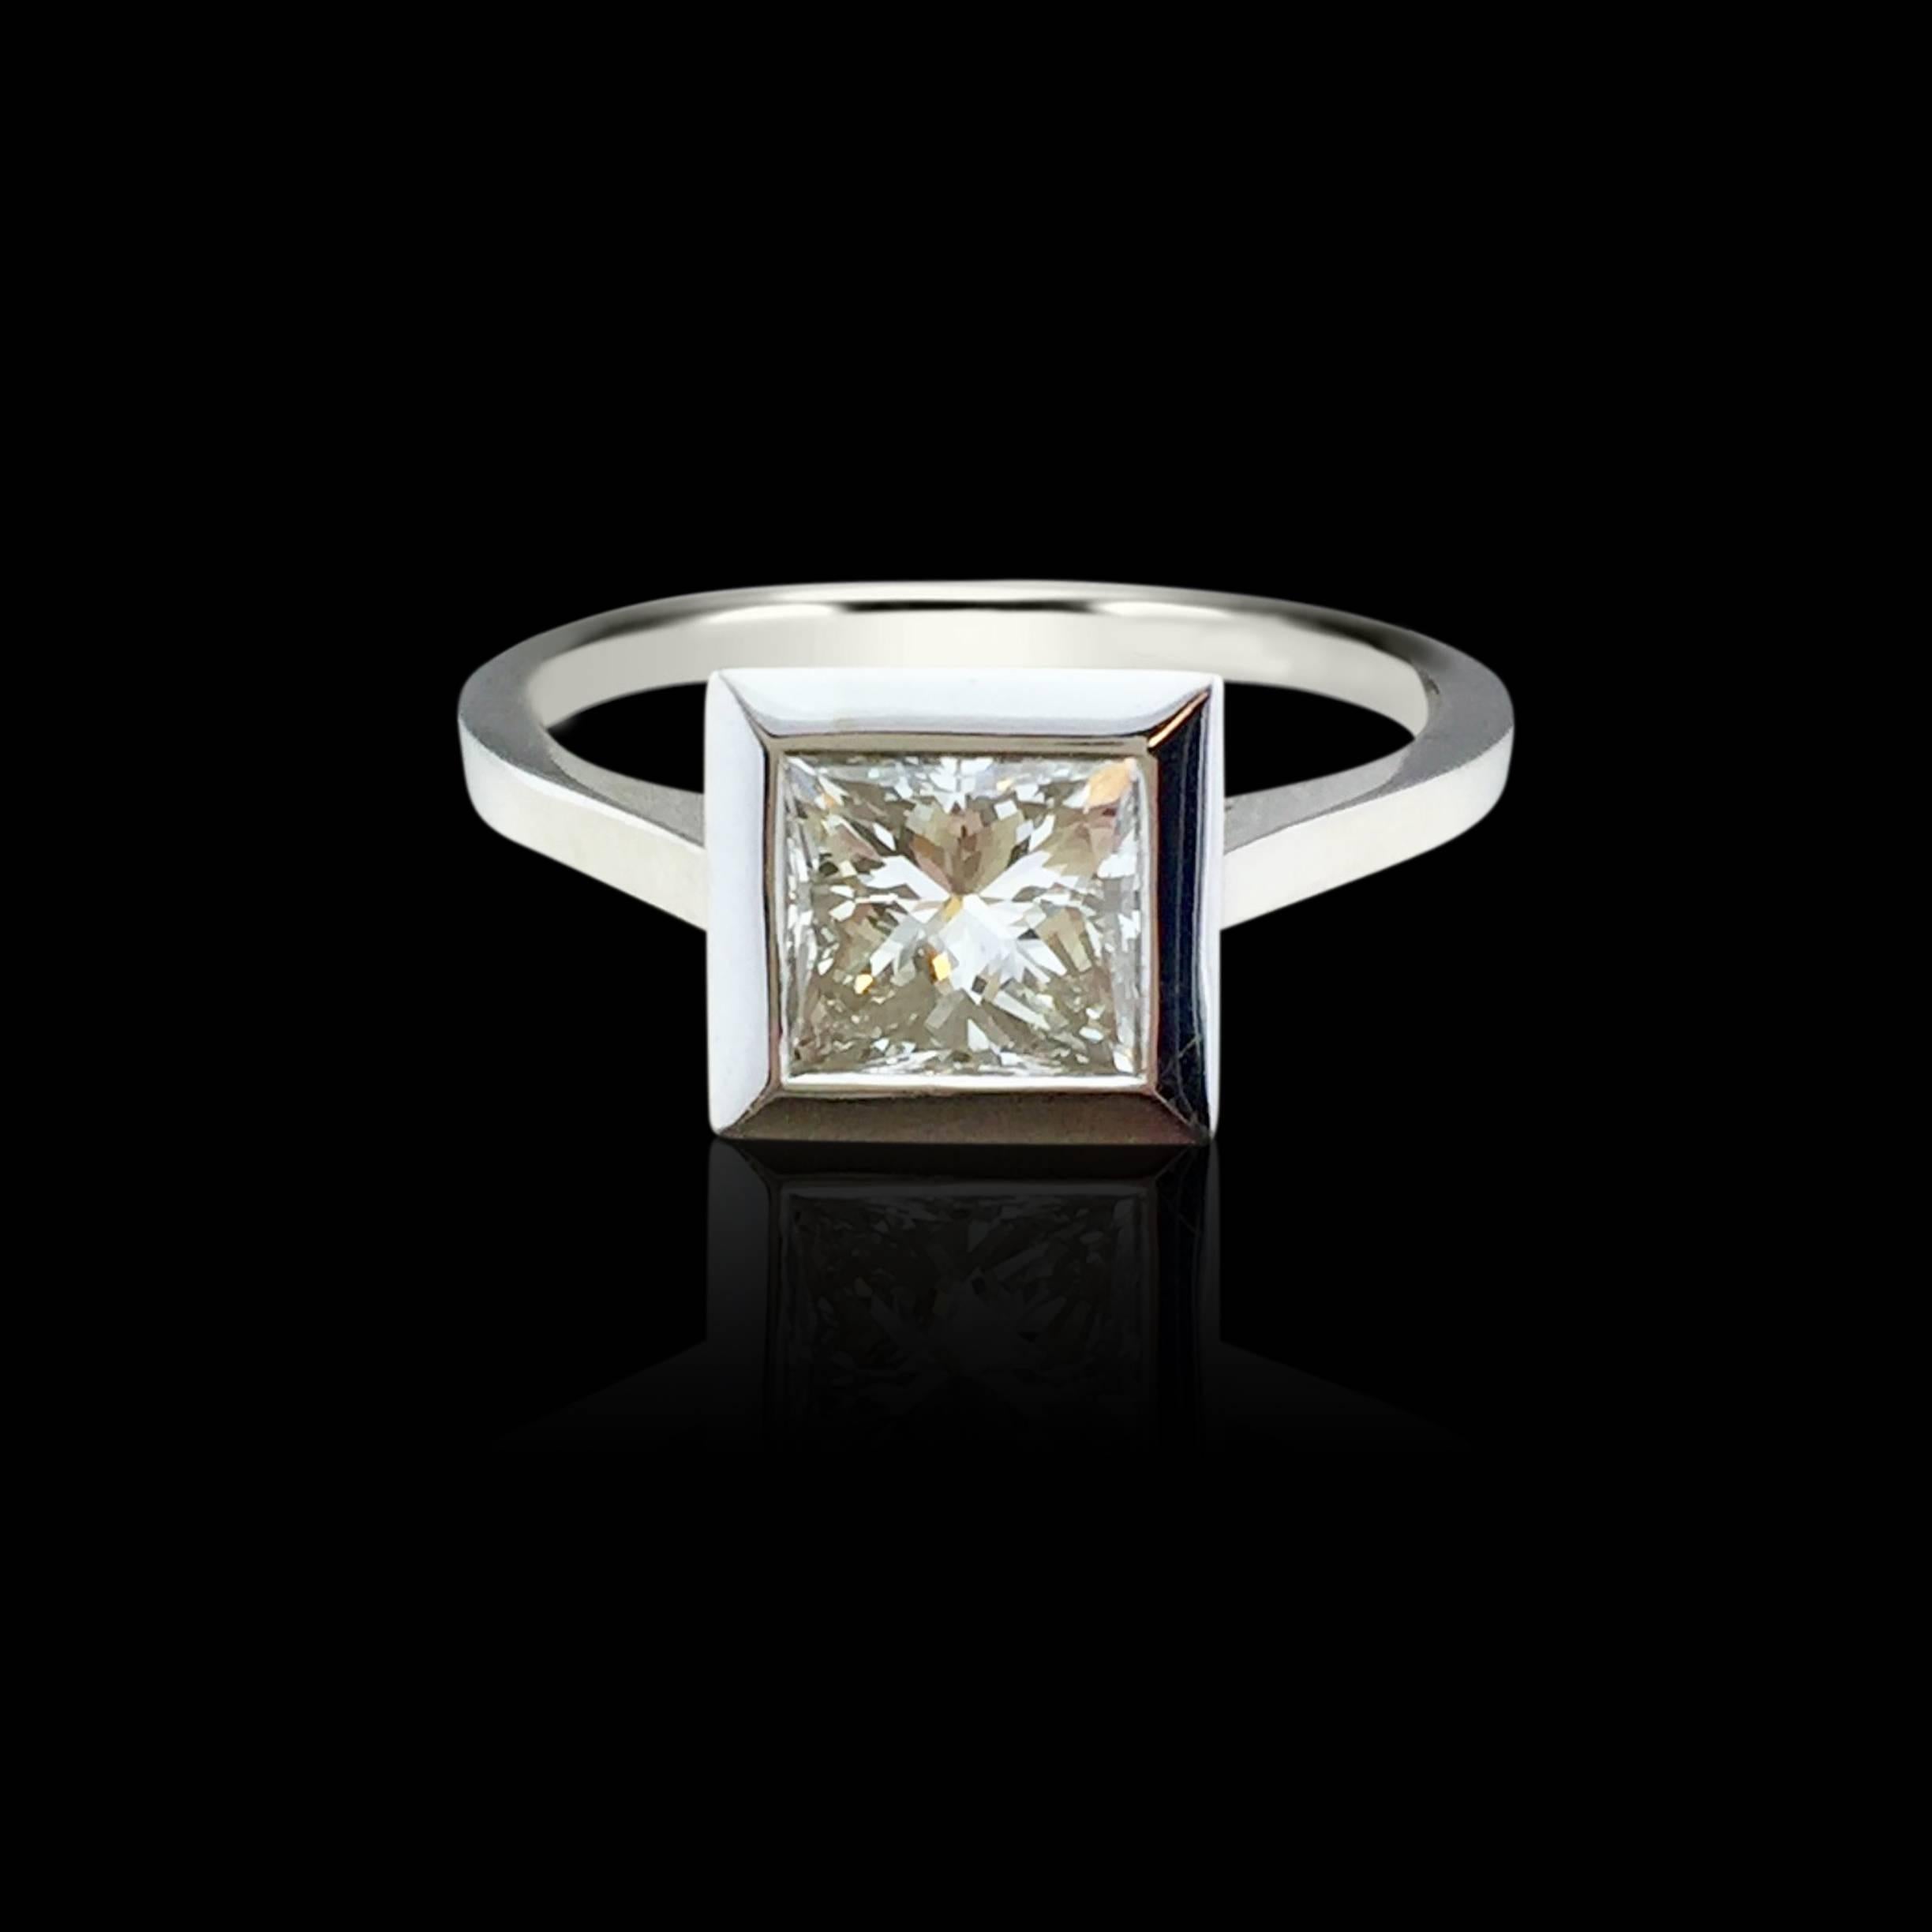 This contemporary low profile ring features a glistening GIA H/VS1 modified rectangular brilliant-cut (princess-cut) diamond weighing 1.06ct, bezel-set in 18k white gold. Currently the ring is a size 5 3/4, and can be adjusted up or down, and weighs